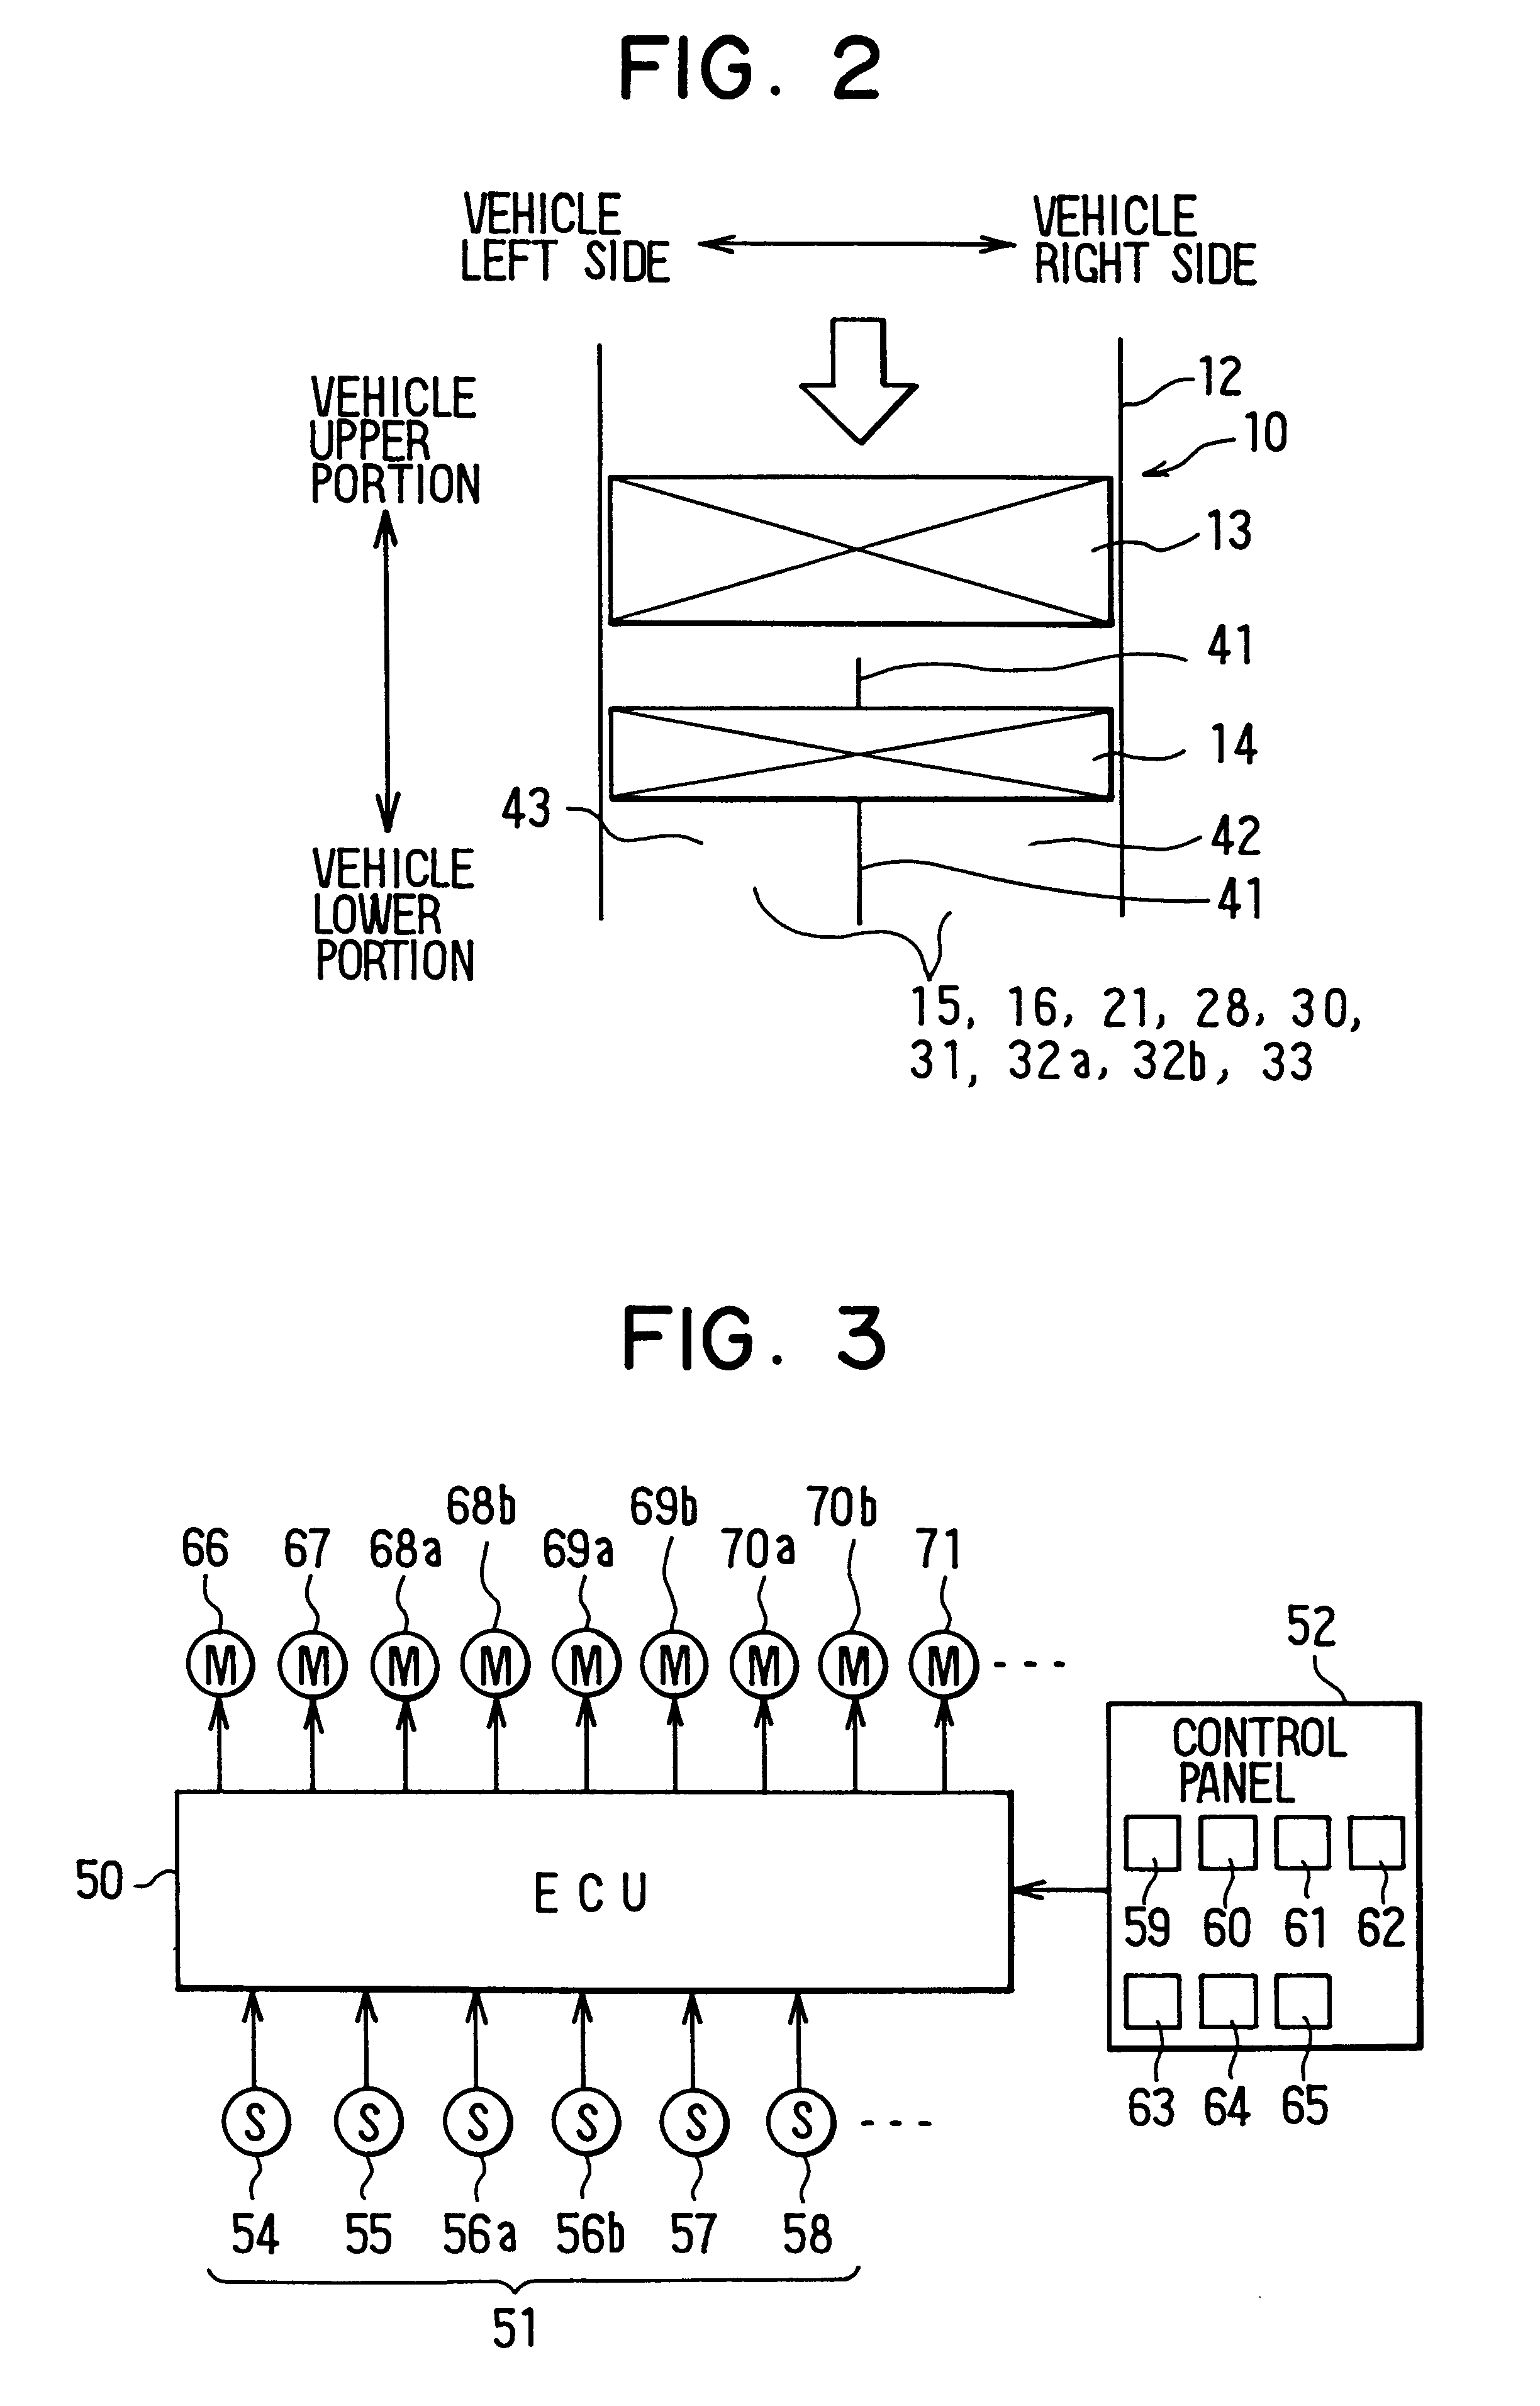 Vehicle air-conditioning system with independent left/right temperature control during maximum cooling